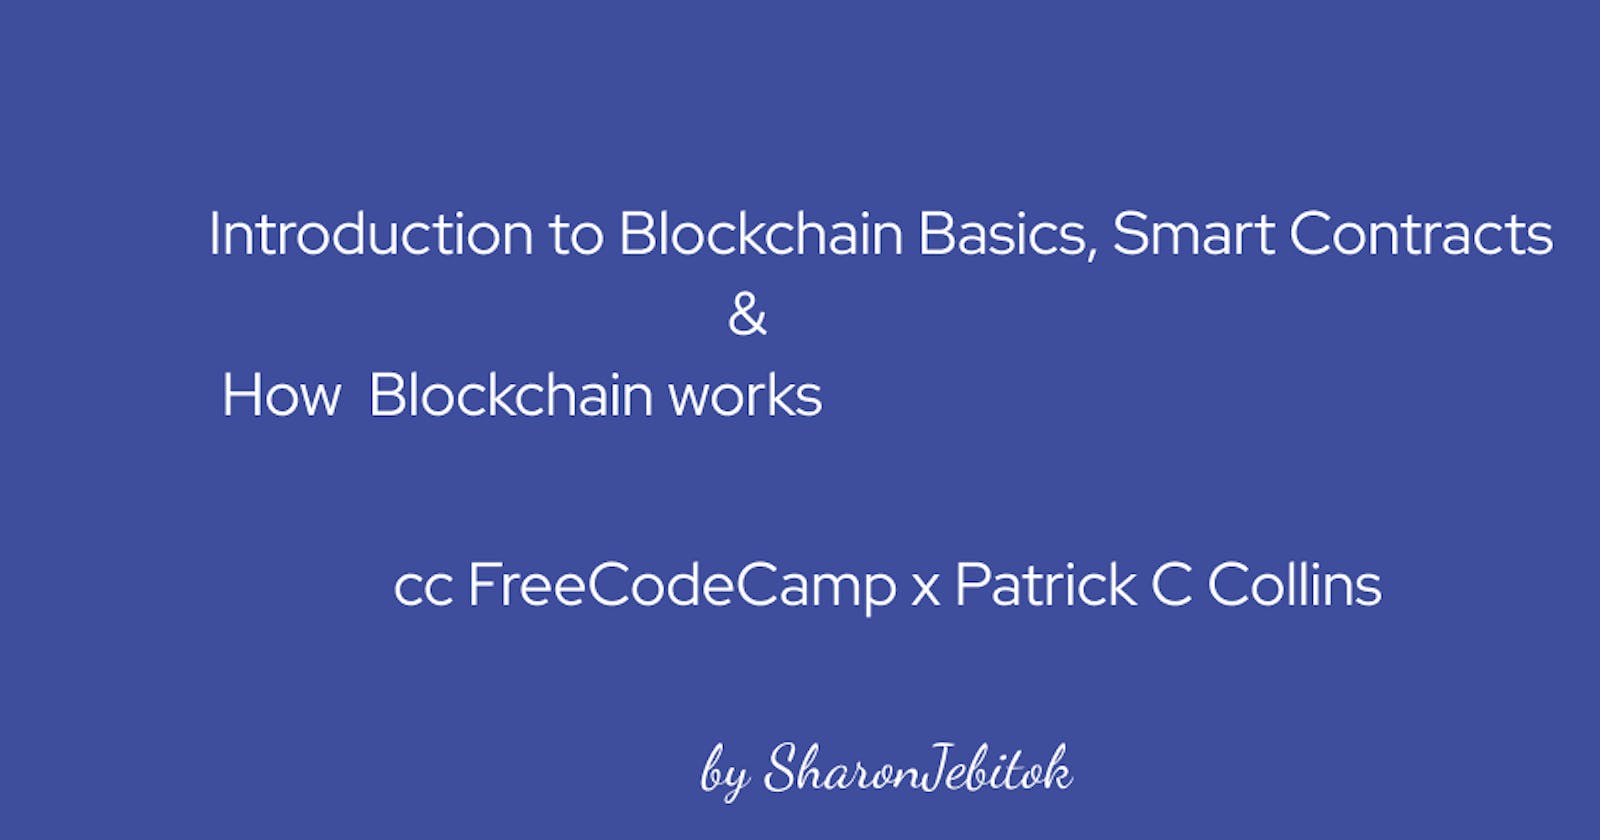 Introduction to Blockchain Basics & Smart Contracts